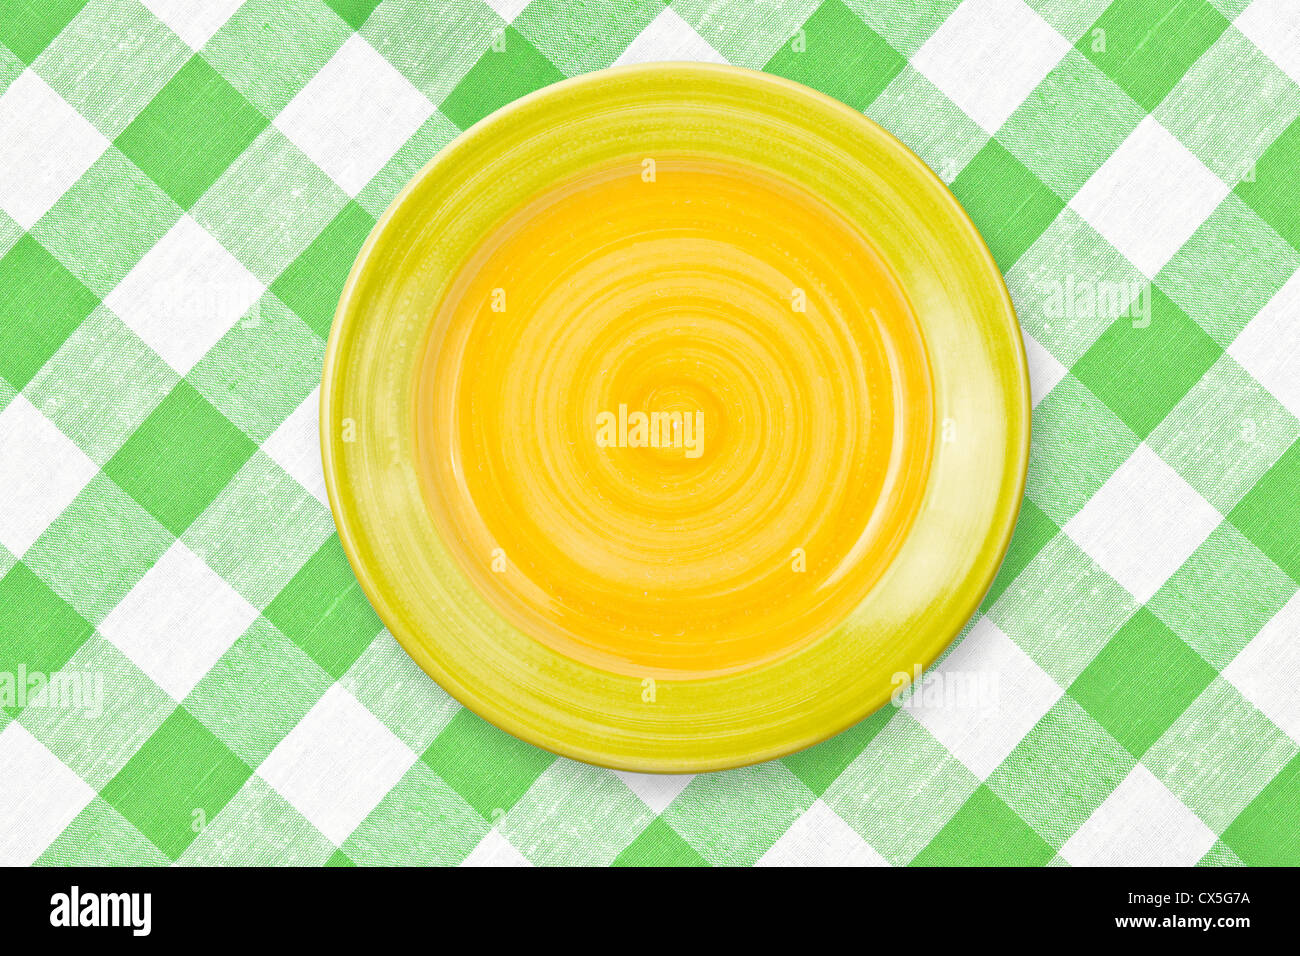 Round yellow plate on checked tablecloth Stock Photo